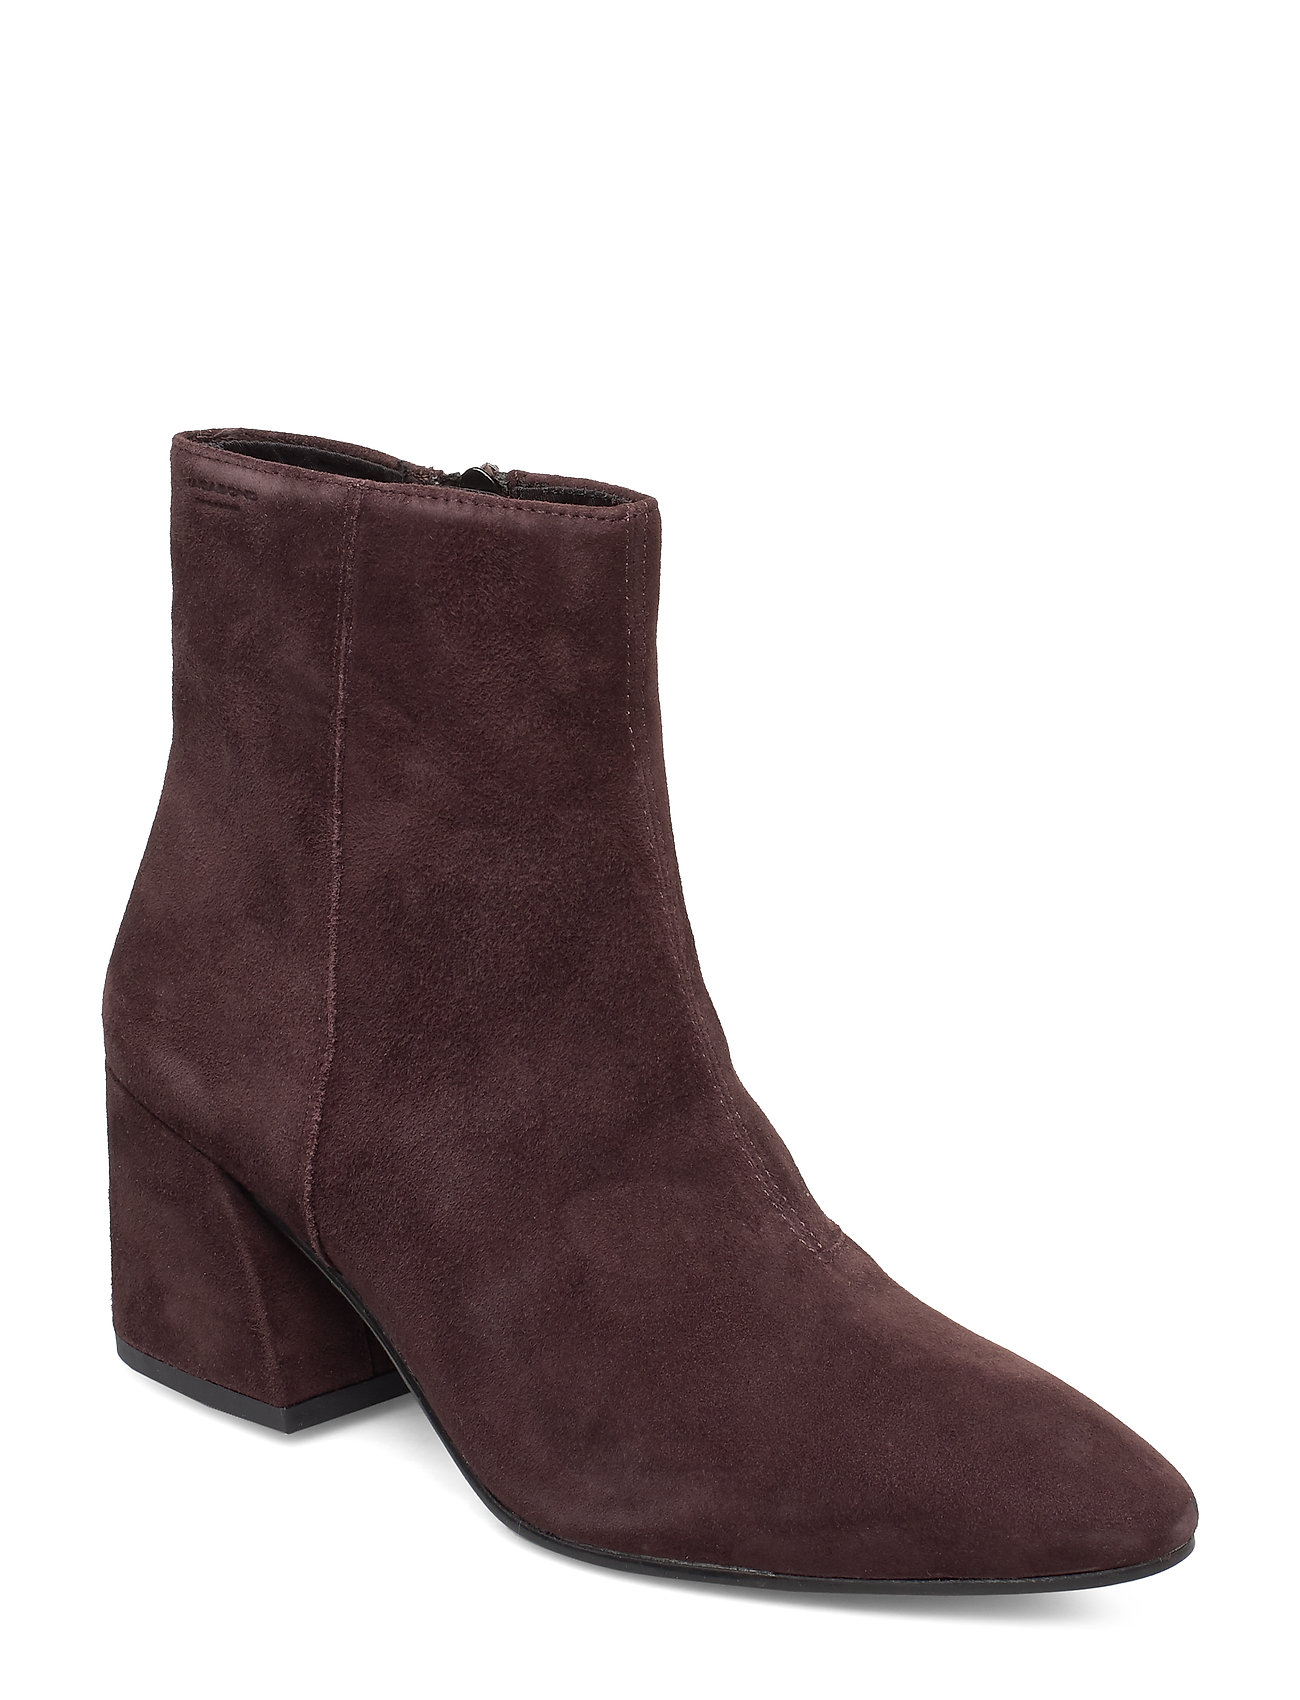 Olivia Shoes Boots Ankle Boots Ankle Boot - Heel Ruskea VAGABOND